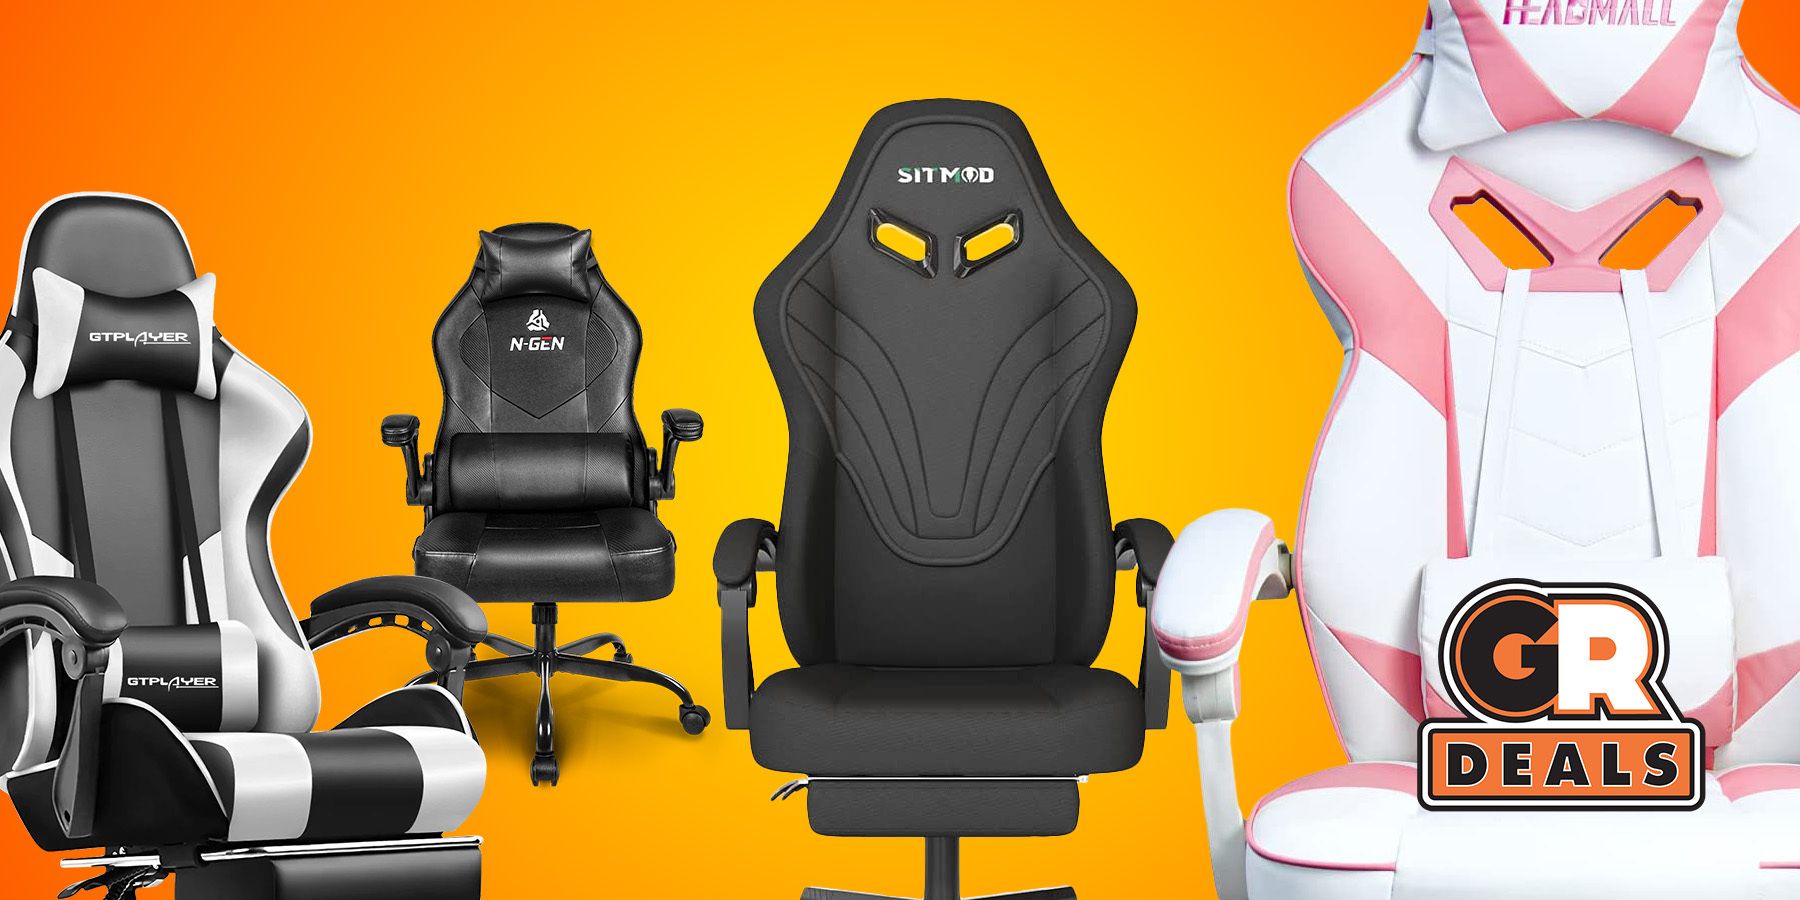 Best Gaming Chairs for Back Pain (from an Ergonomist) - Ergonomic Trends